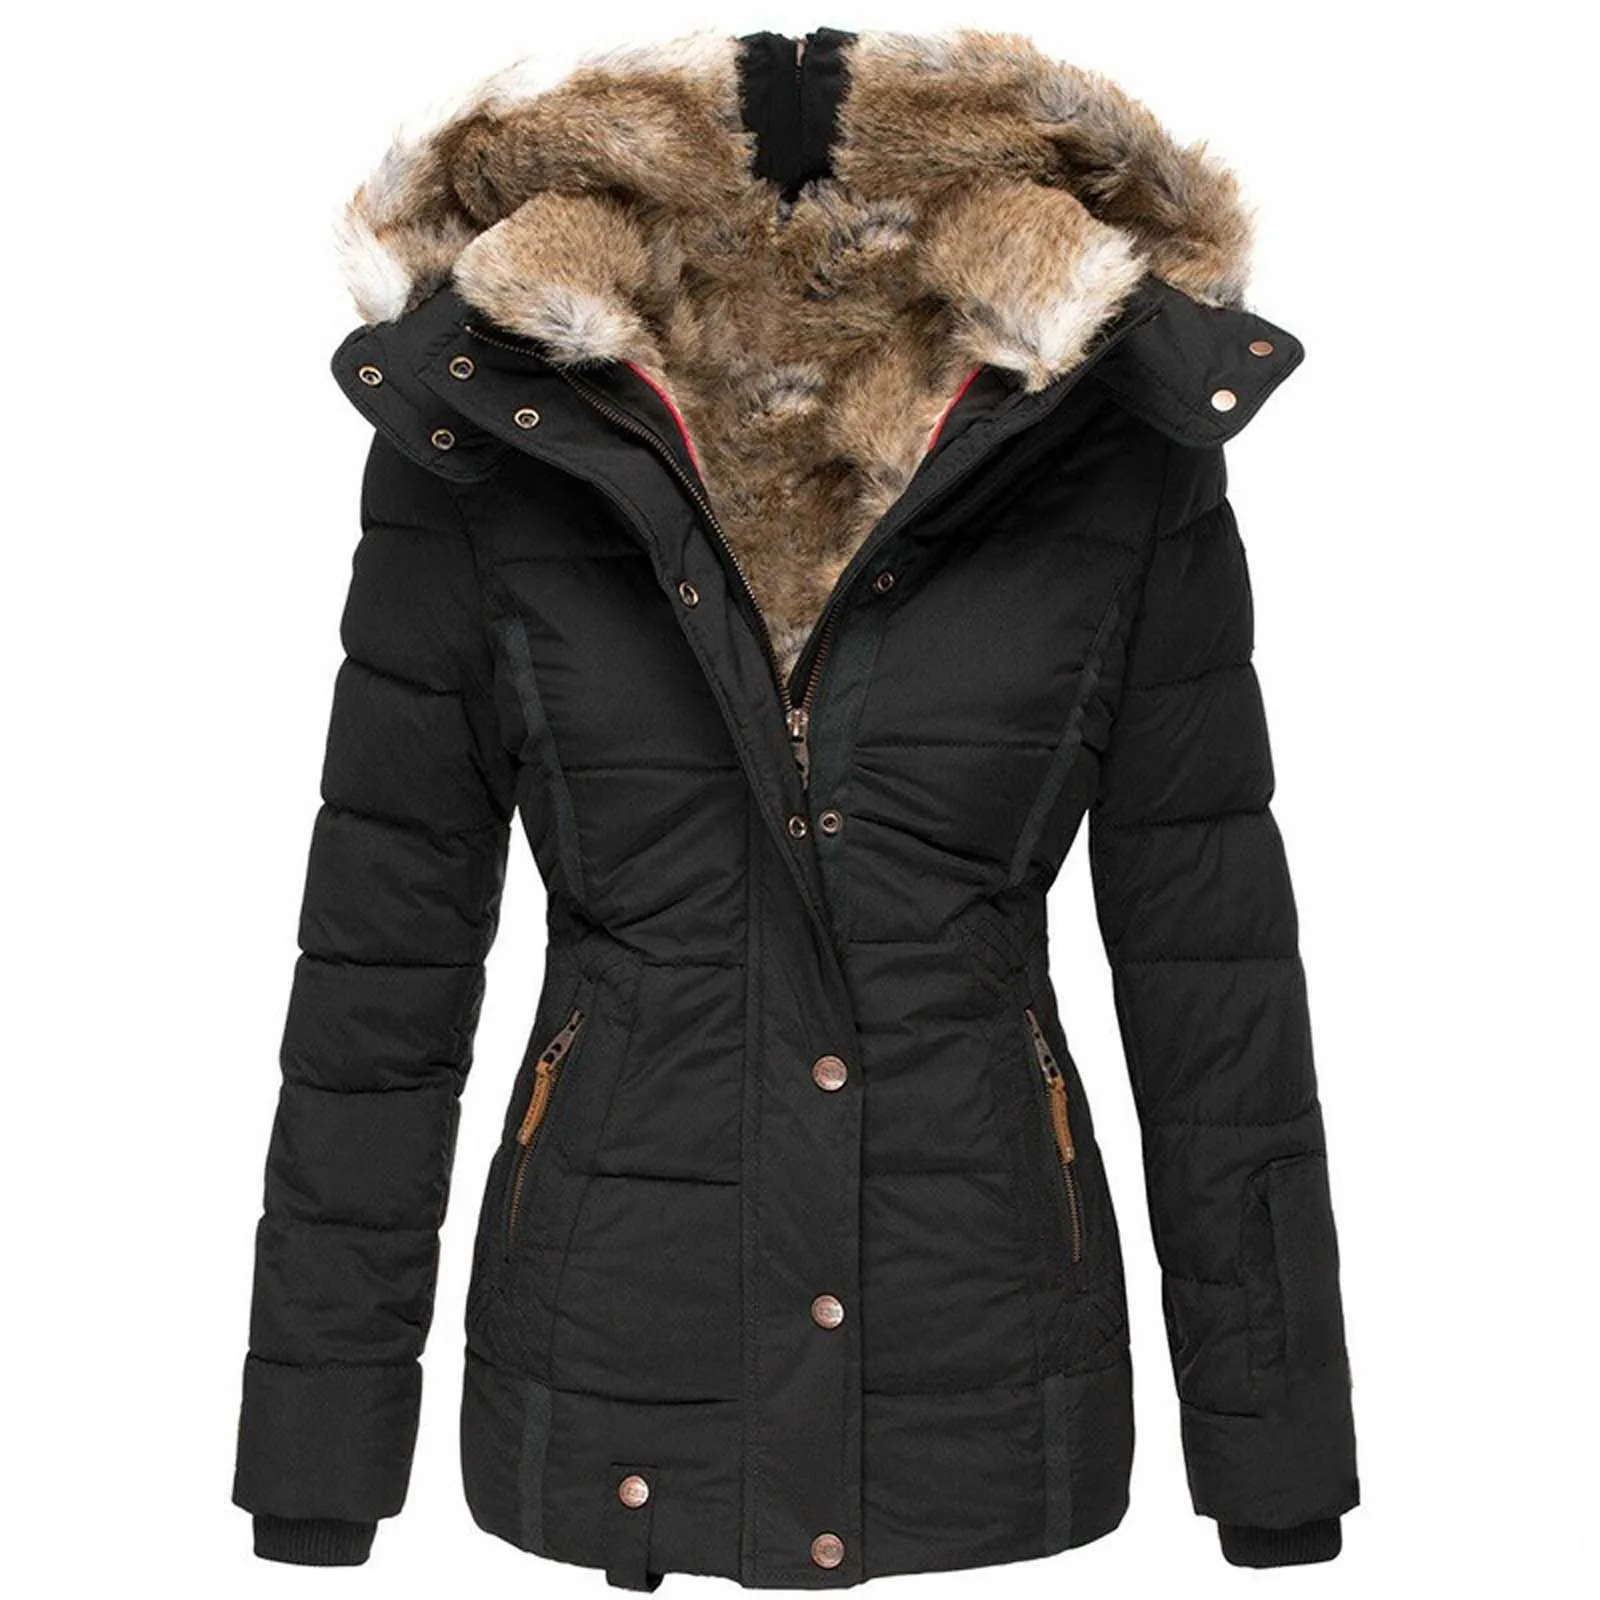 Women's Down Parkas Cotton Padded Fur Parka Womens Winter Lapel Buttons Long Trench Thick Warm Jacket Ladies Overcoat Outwear Female Pockets Parkas T221011